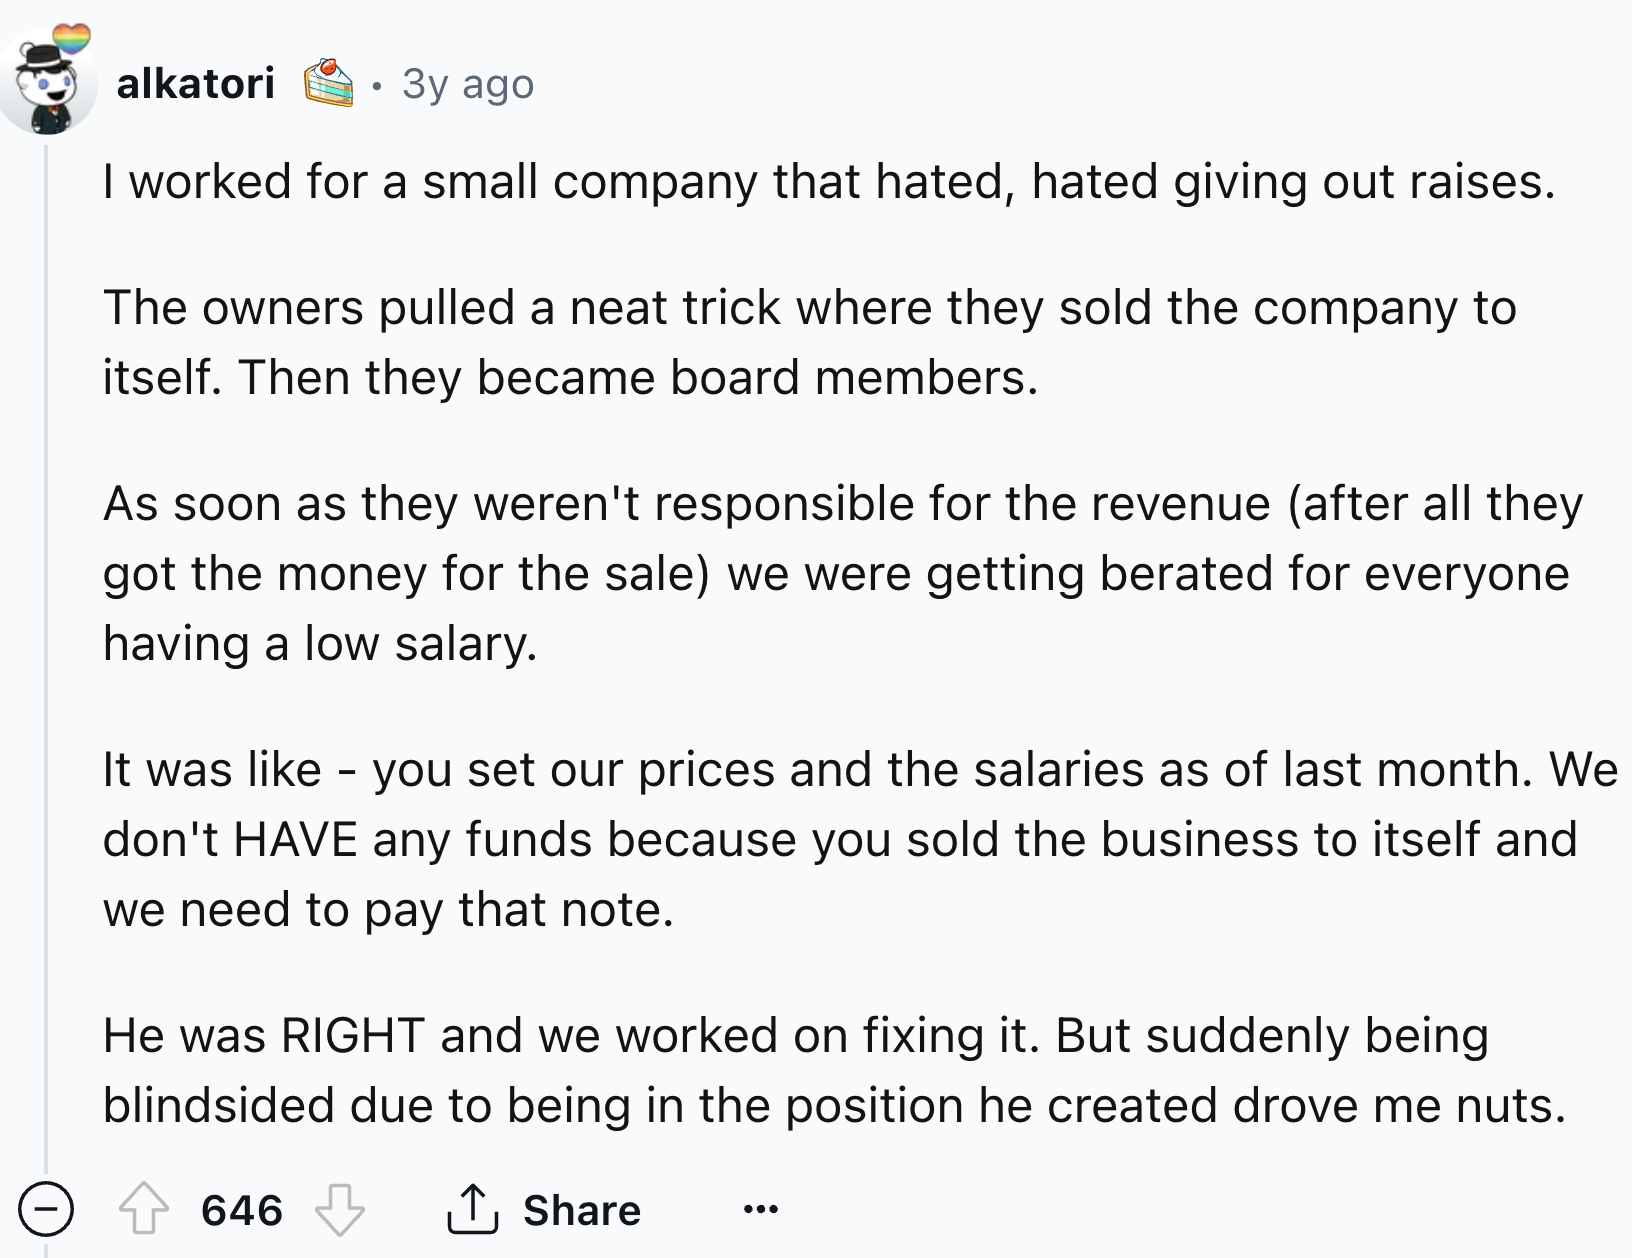 document - alkatori 3y ago I worked for a small company that hated, hated giving out raises. The owners pulled a neat trick where they sold the company to itself. Then they became board members. As soon as they weren't responsible for the revenue after al